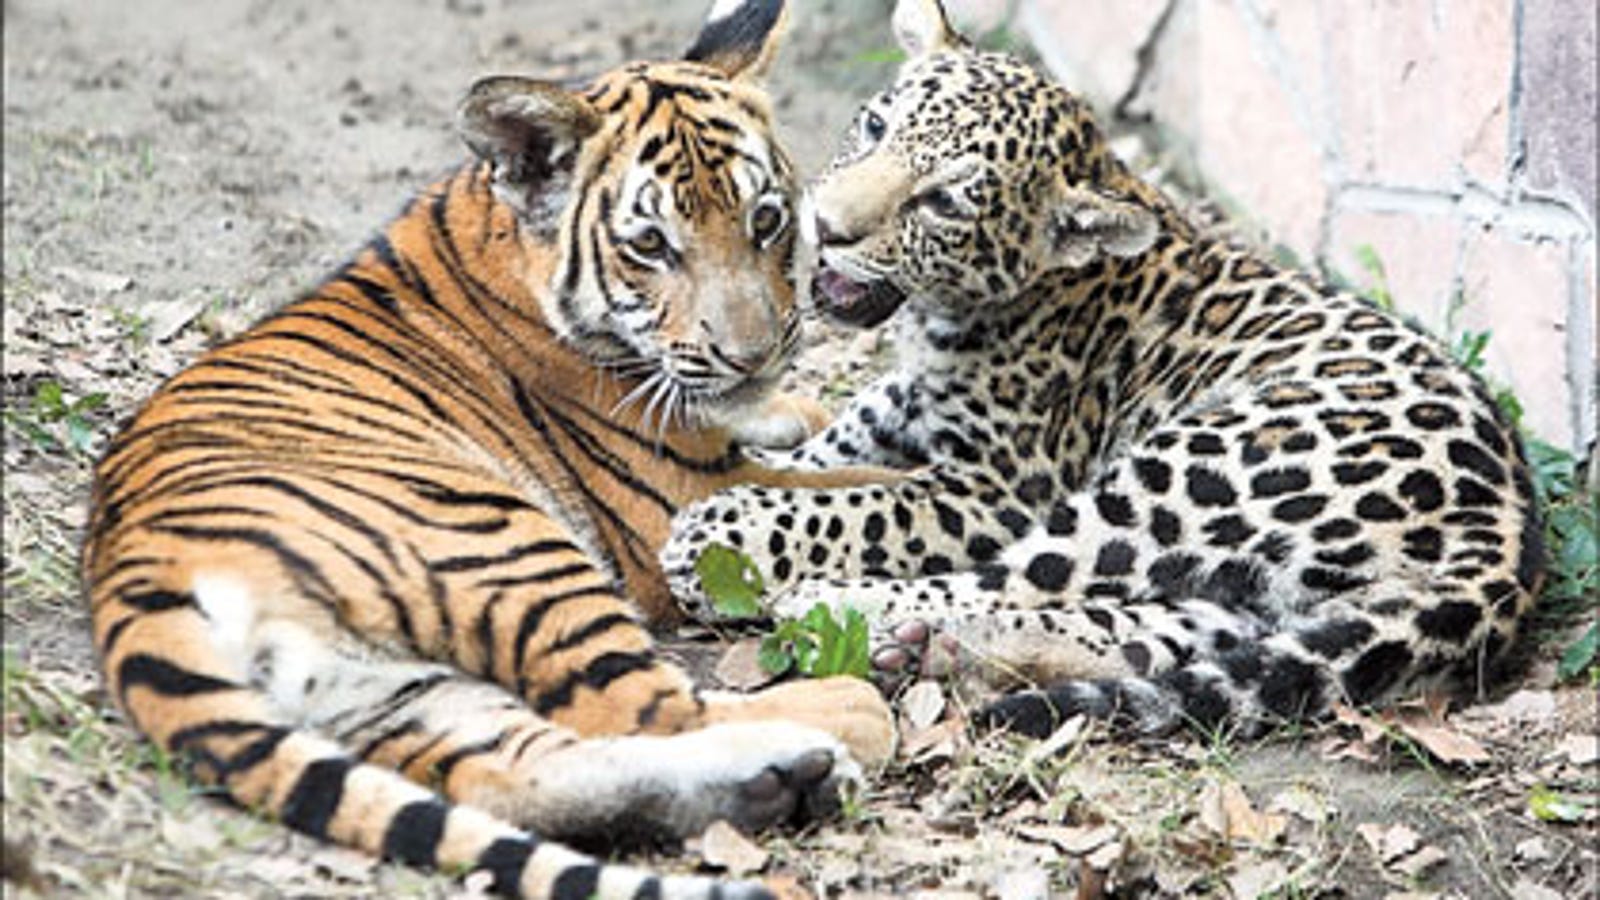 Can jaguars and tigers live in harmony?